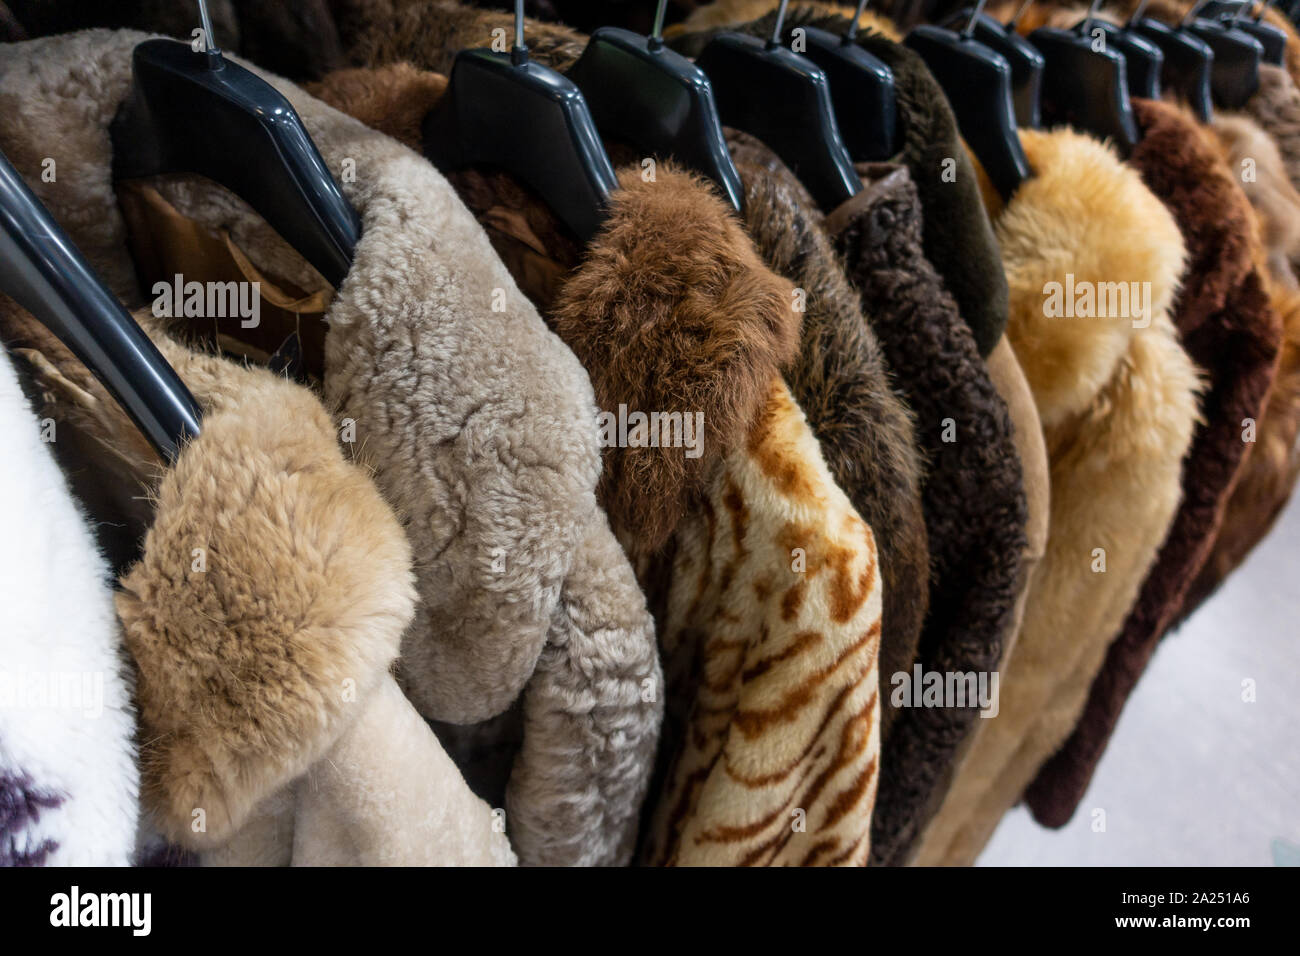 Rail of secondhand fur coats for sale in a thrift store or charity shop ...